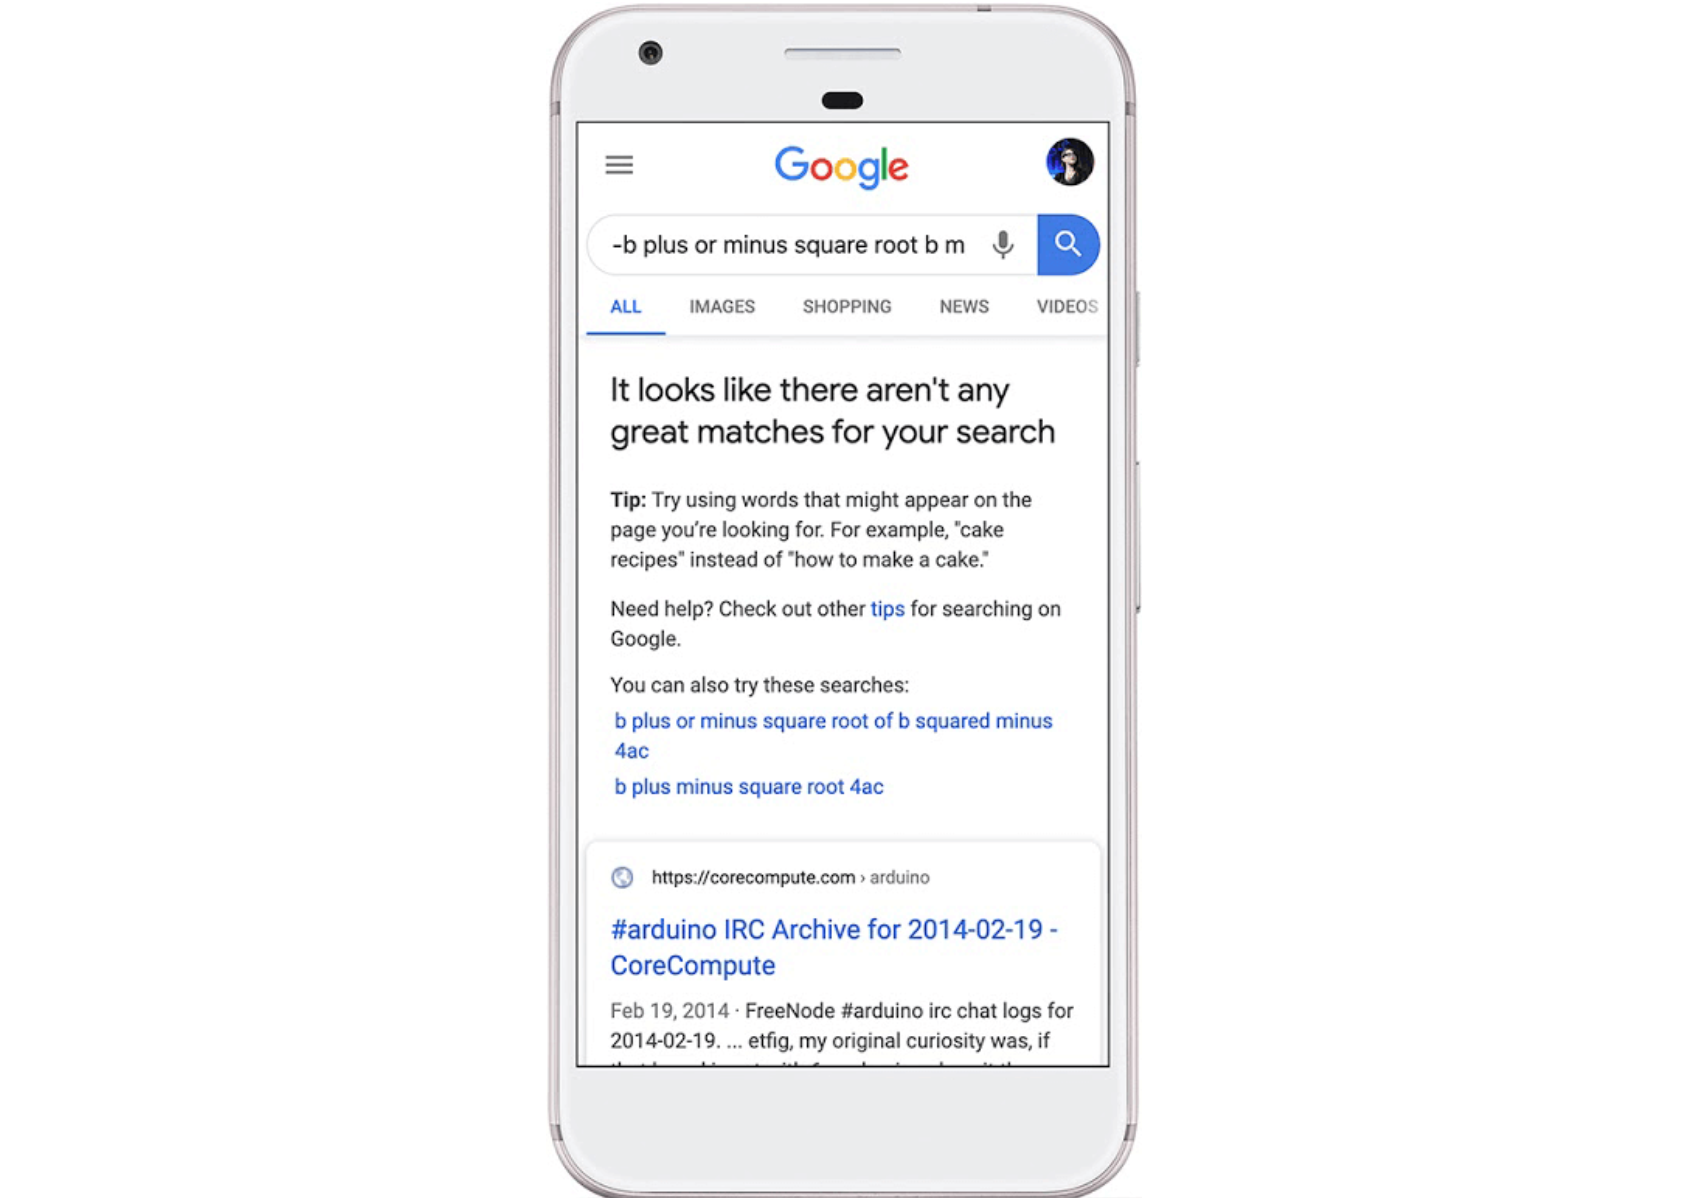 Google launches search tips for when the query doesn’t return great matches